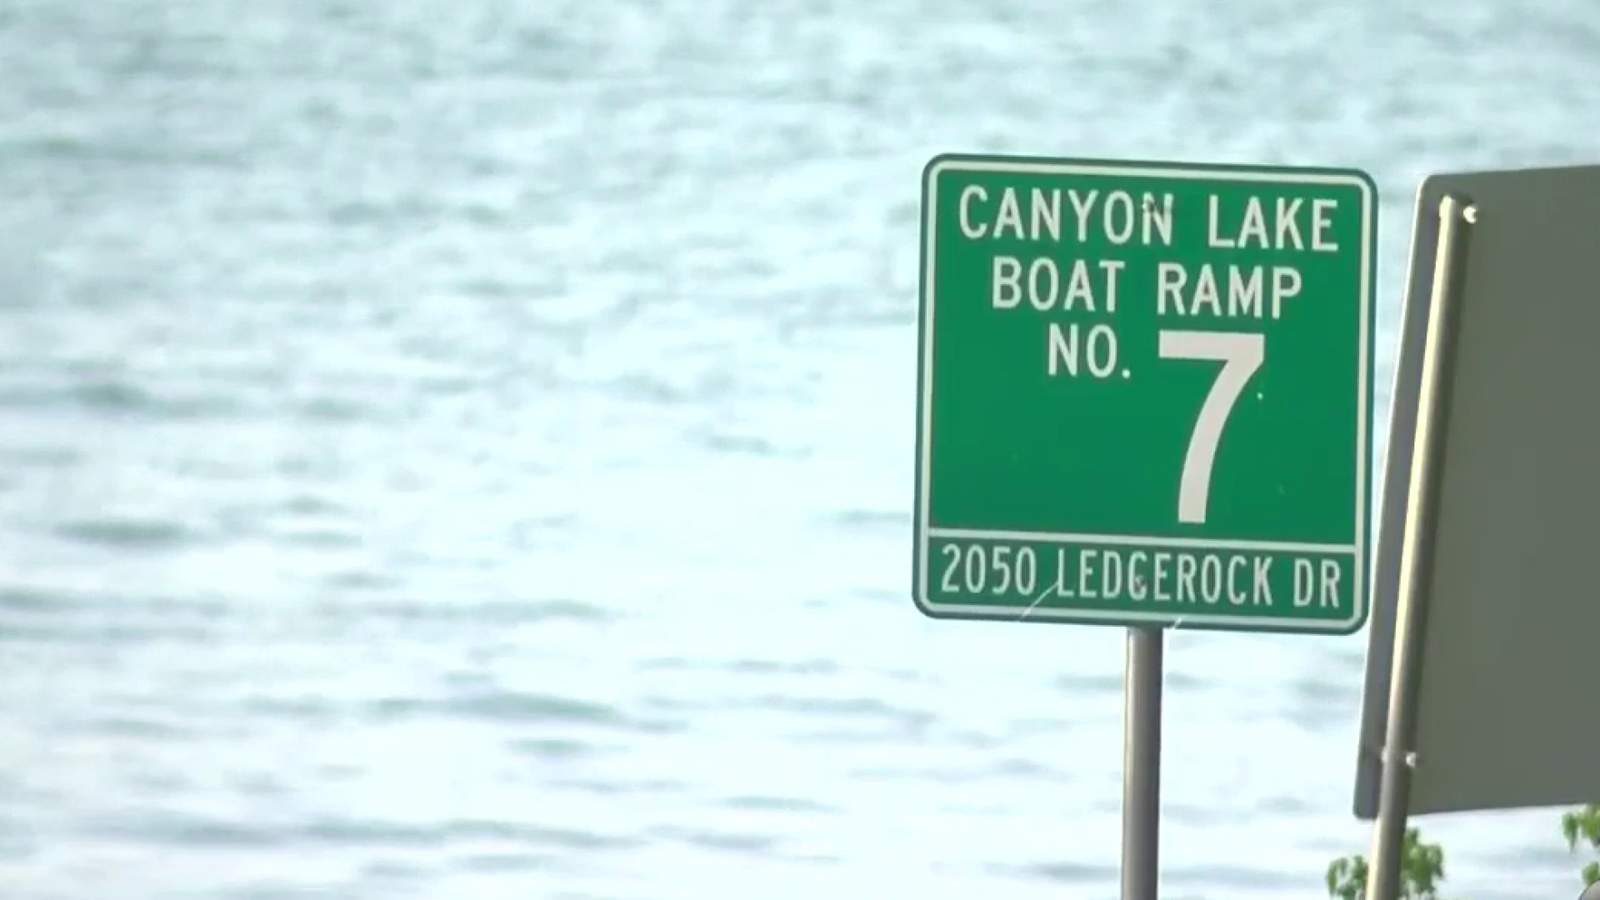 Army Corps of Engineers will lease Canyon Lake Park to Comal County recreation organization